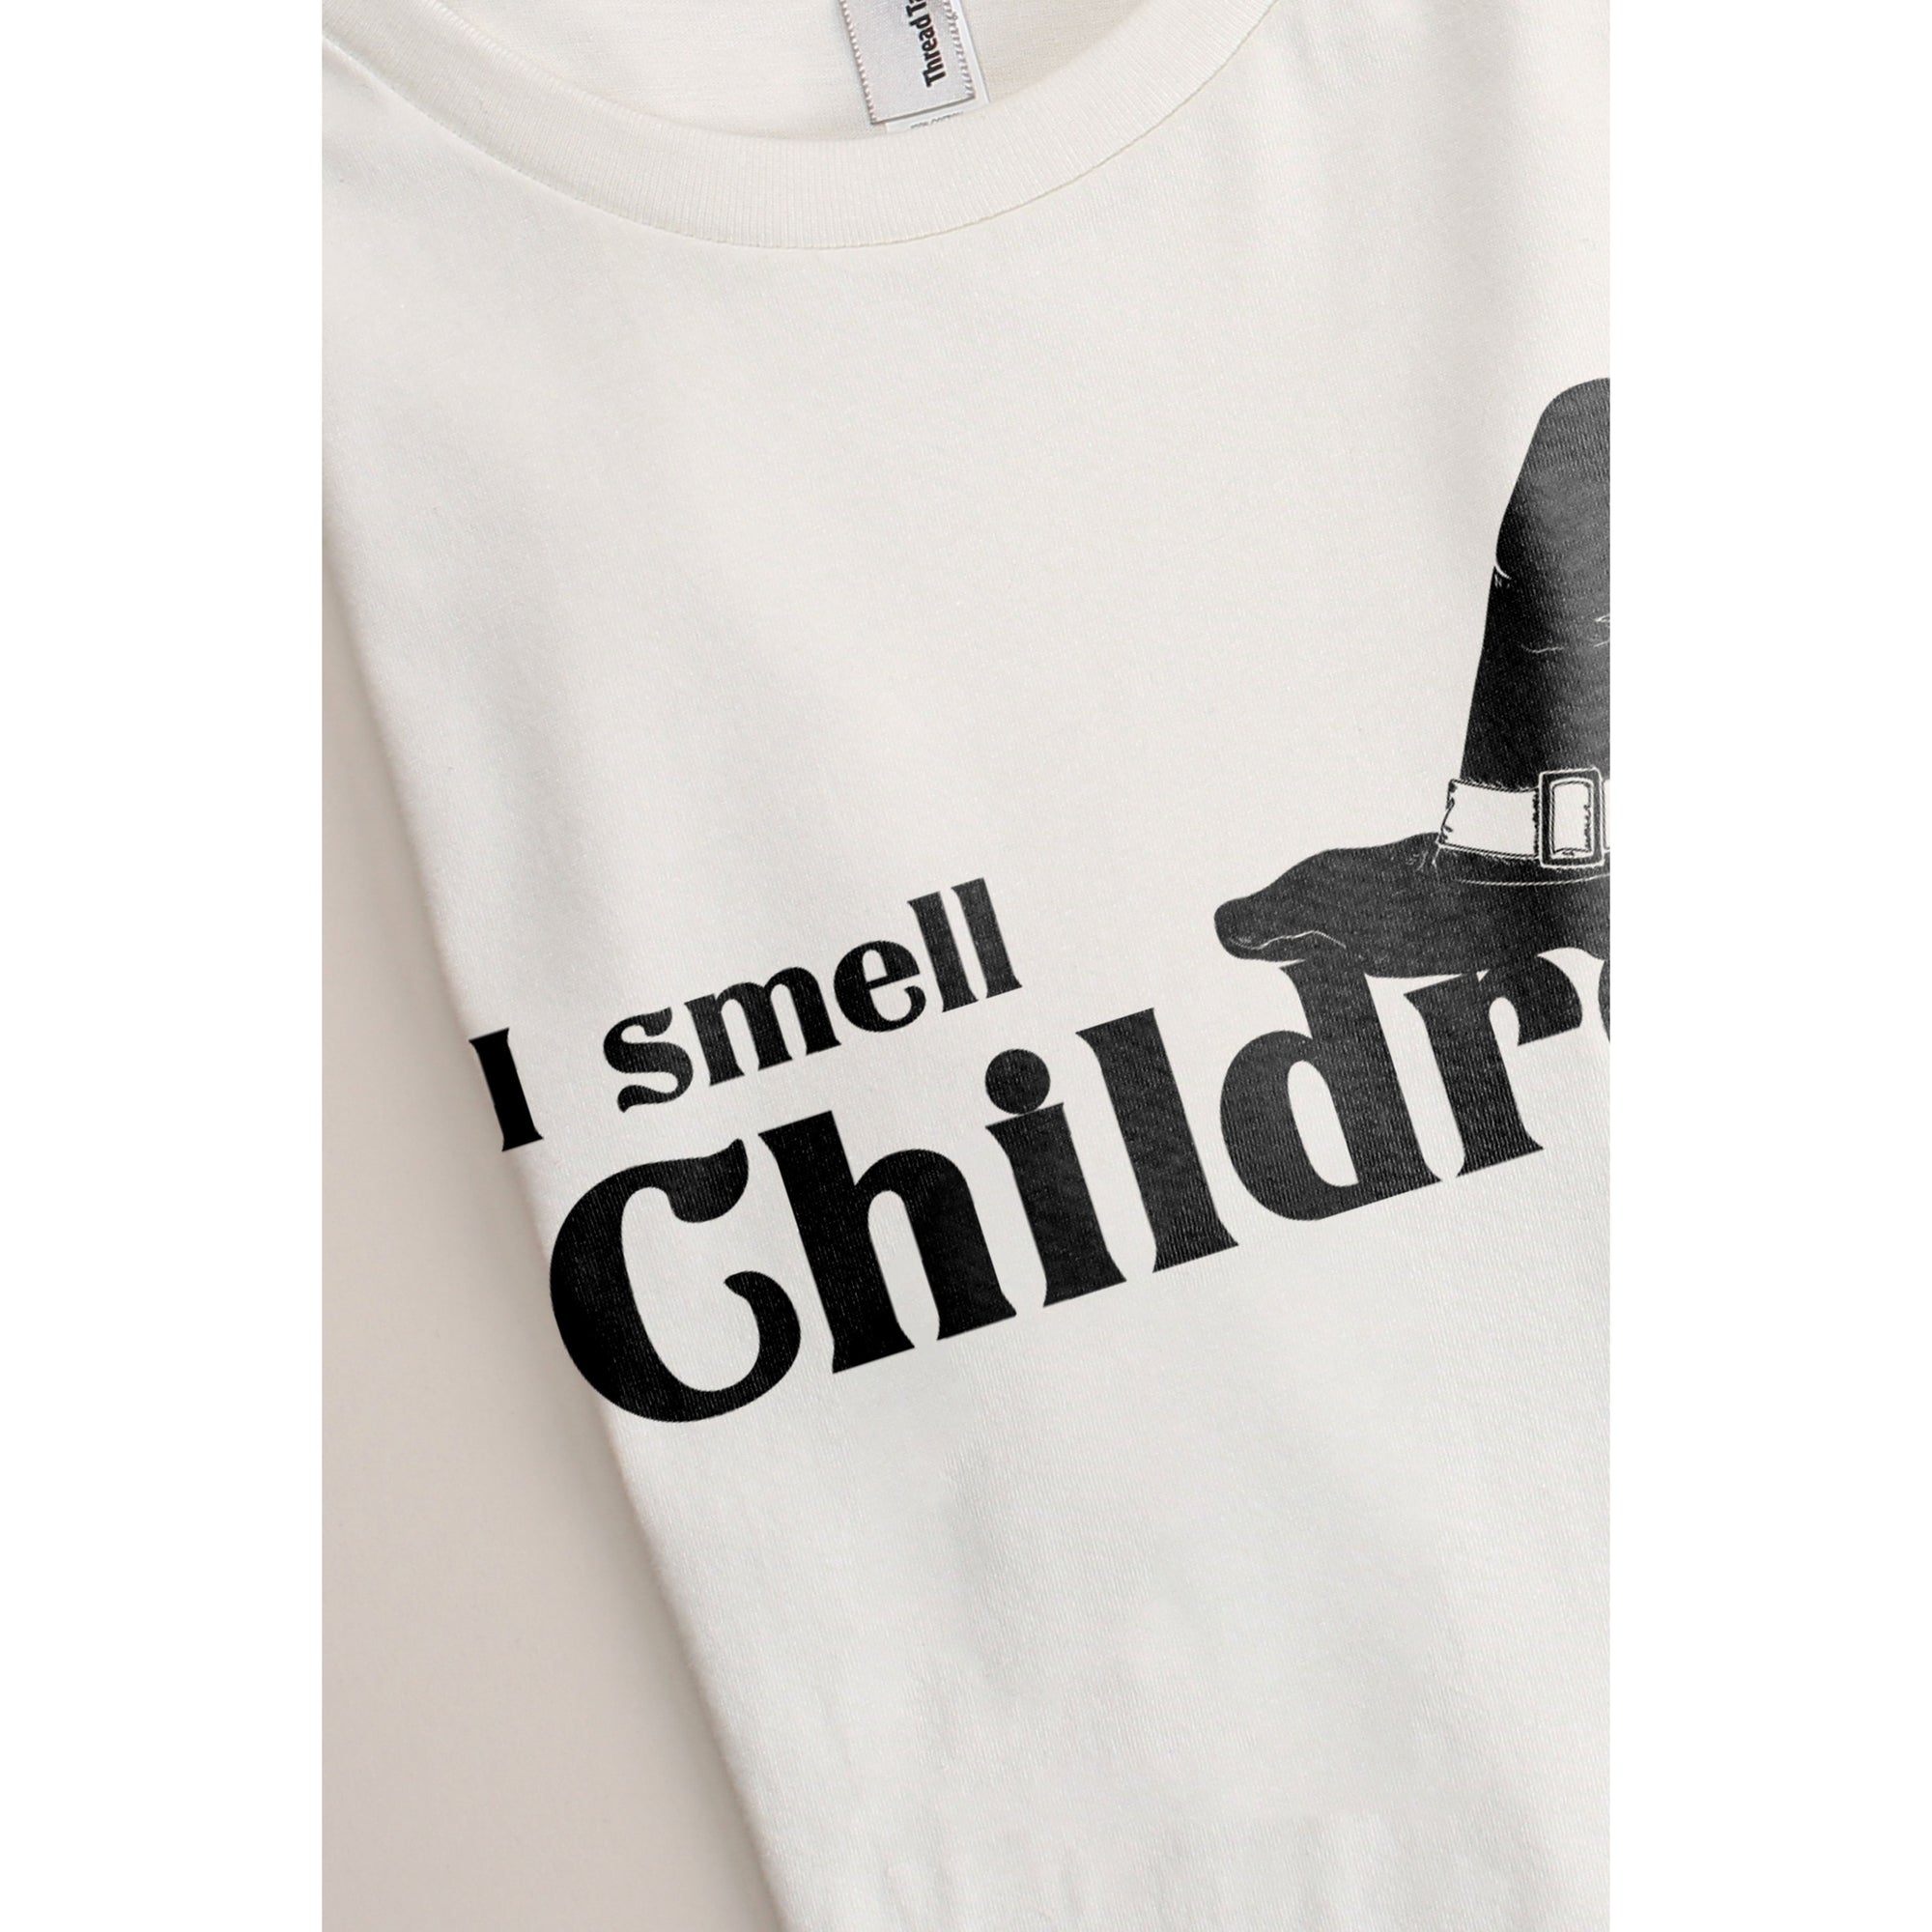 I Smell Children - thread tank | Stories you can wear.